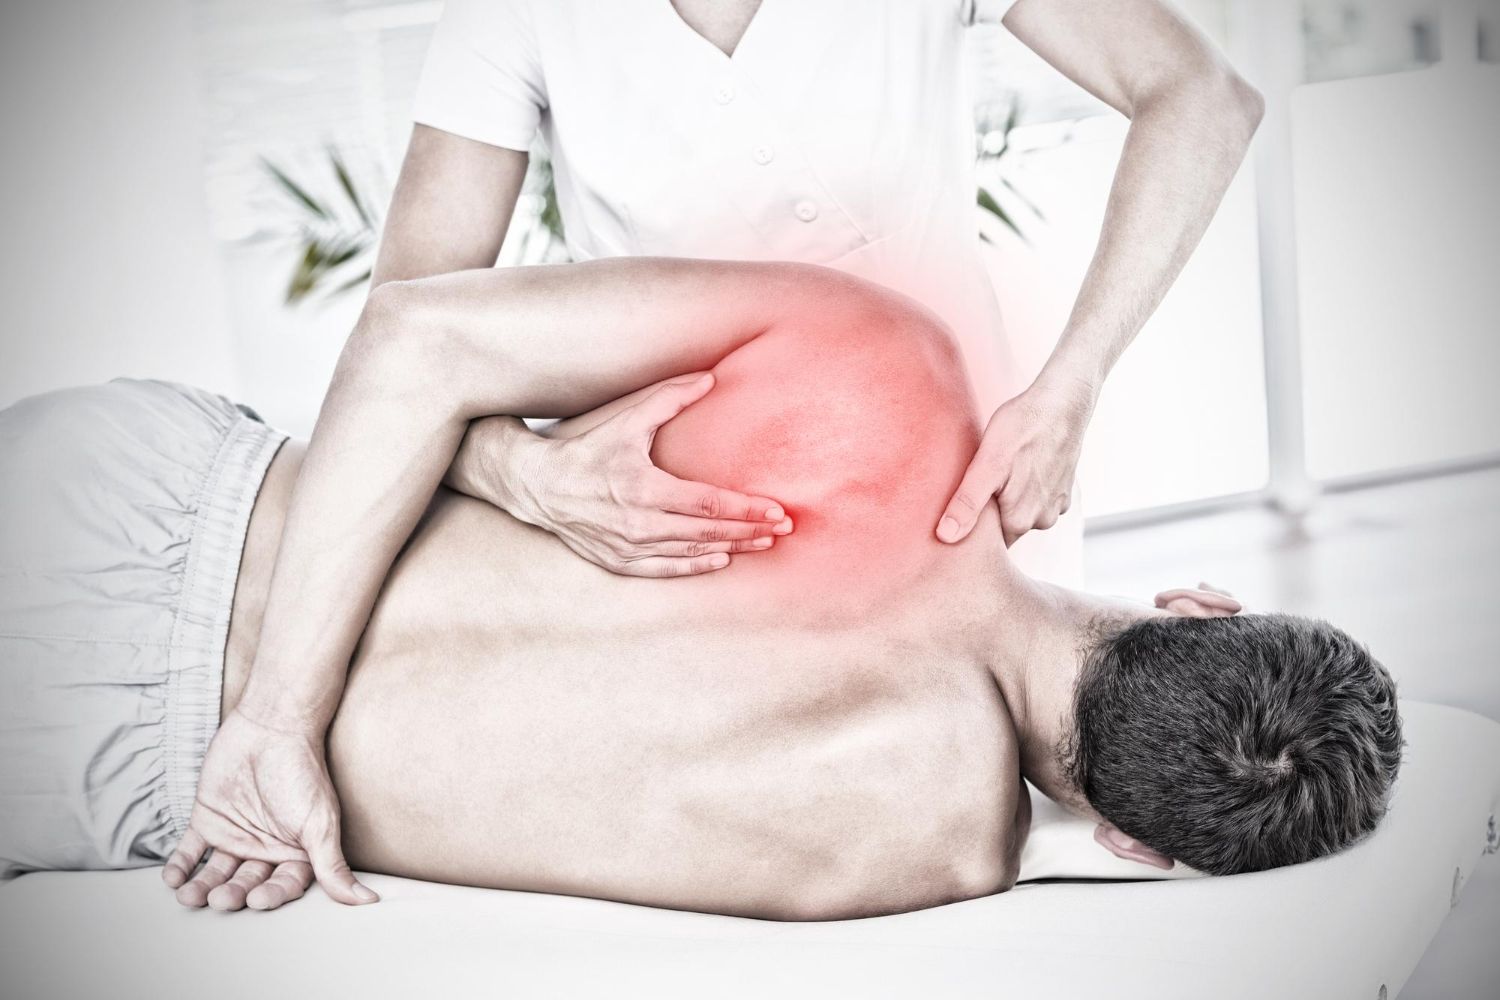 highlighted-pain-against-physiotherapist-doing-back-massage-her-patient image